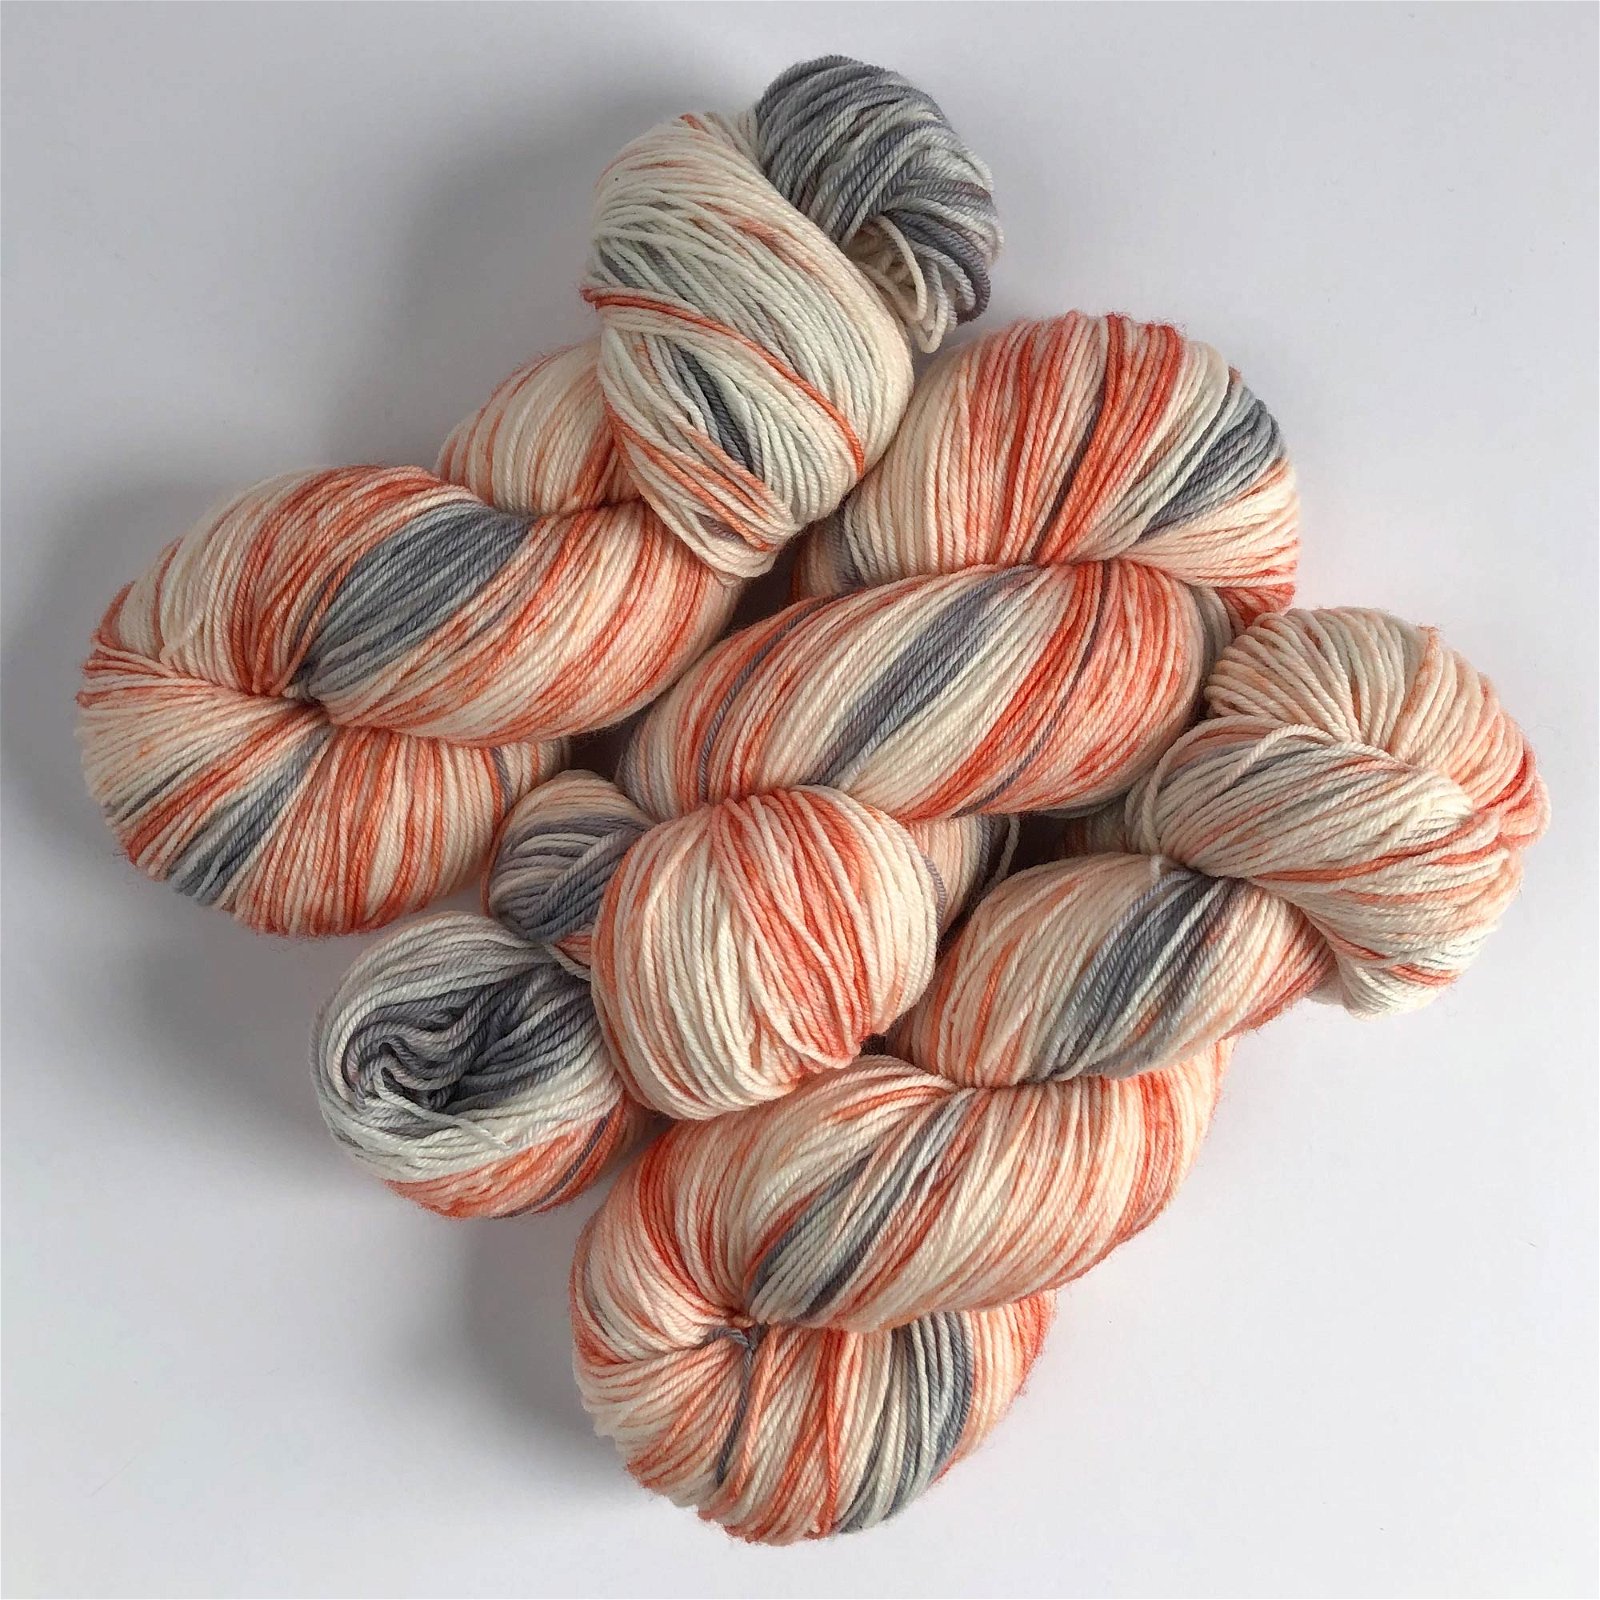 Deep Coral, Gray and White Fingering weight yarn 